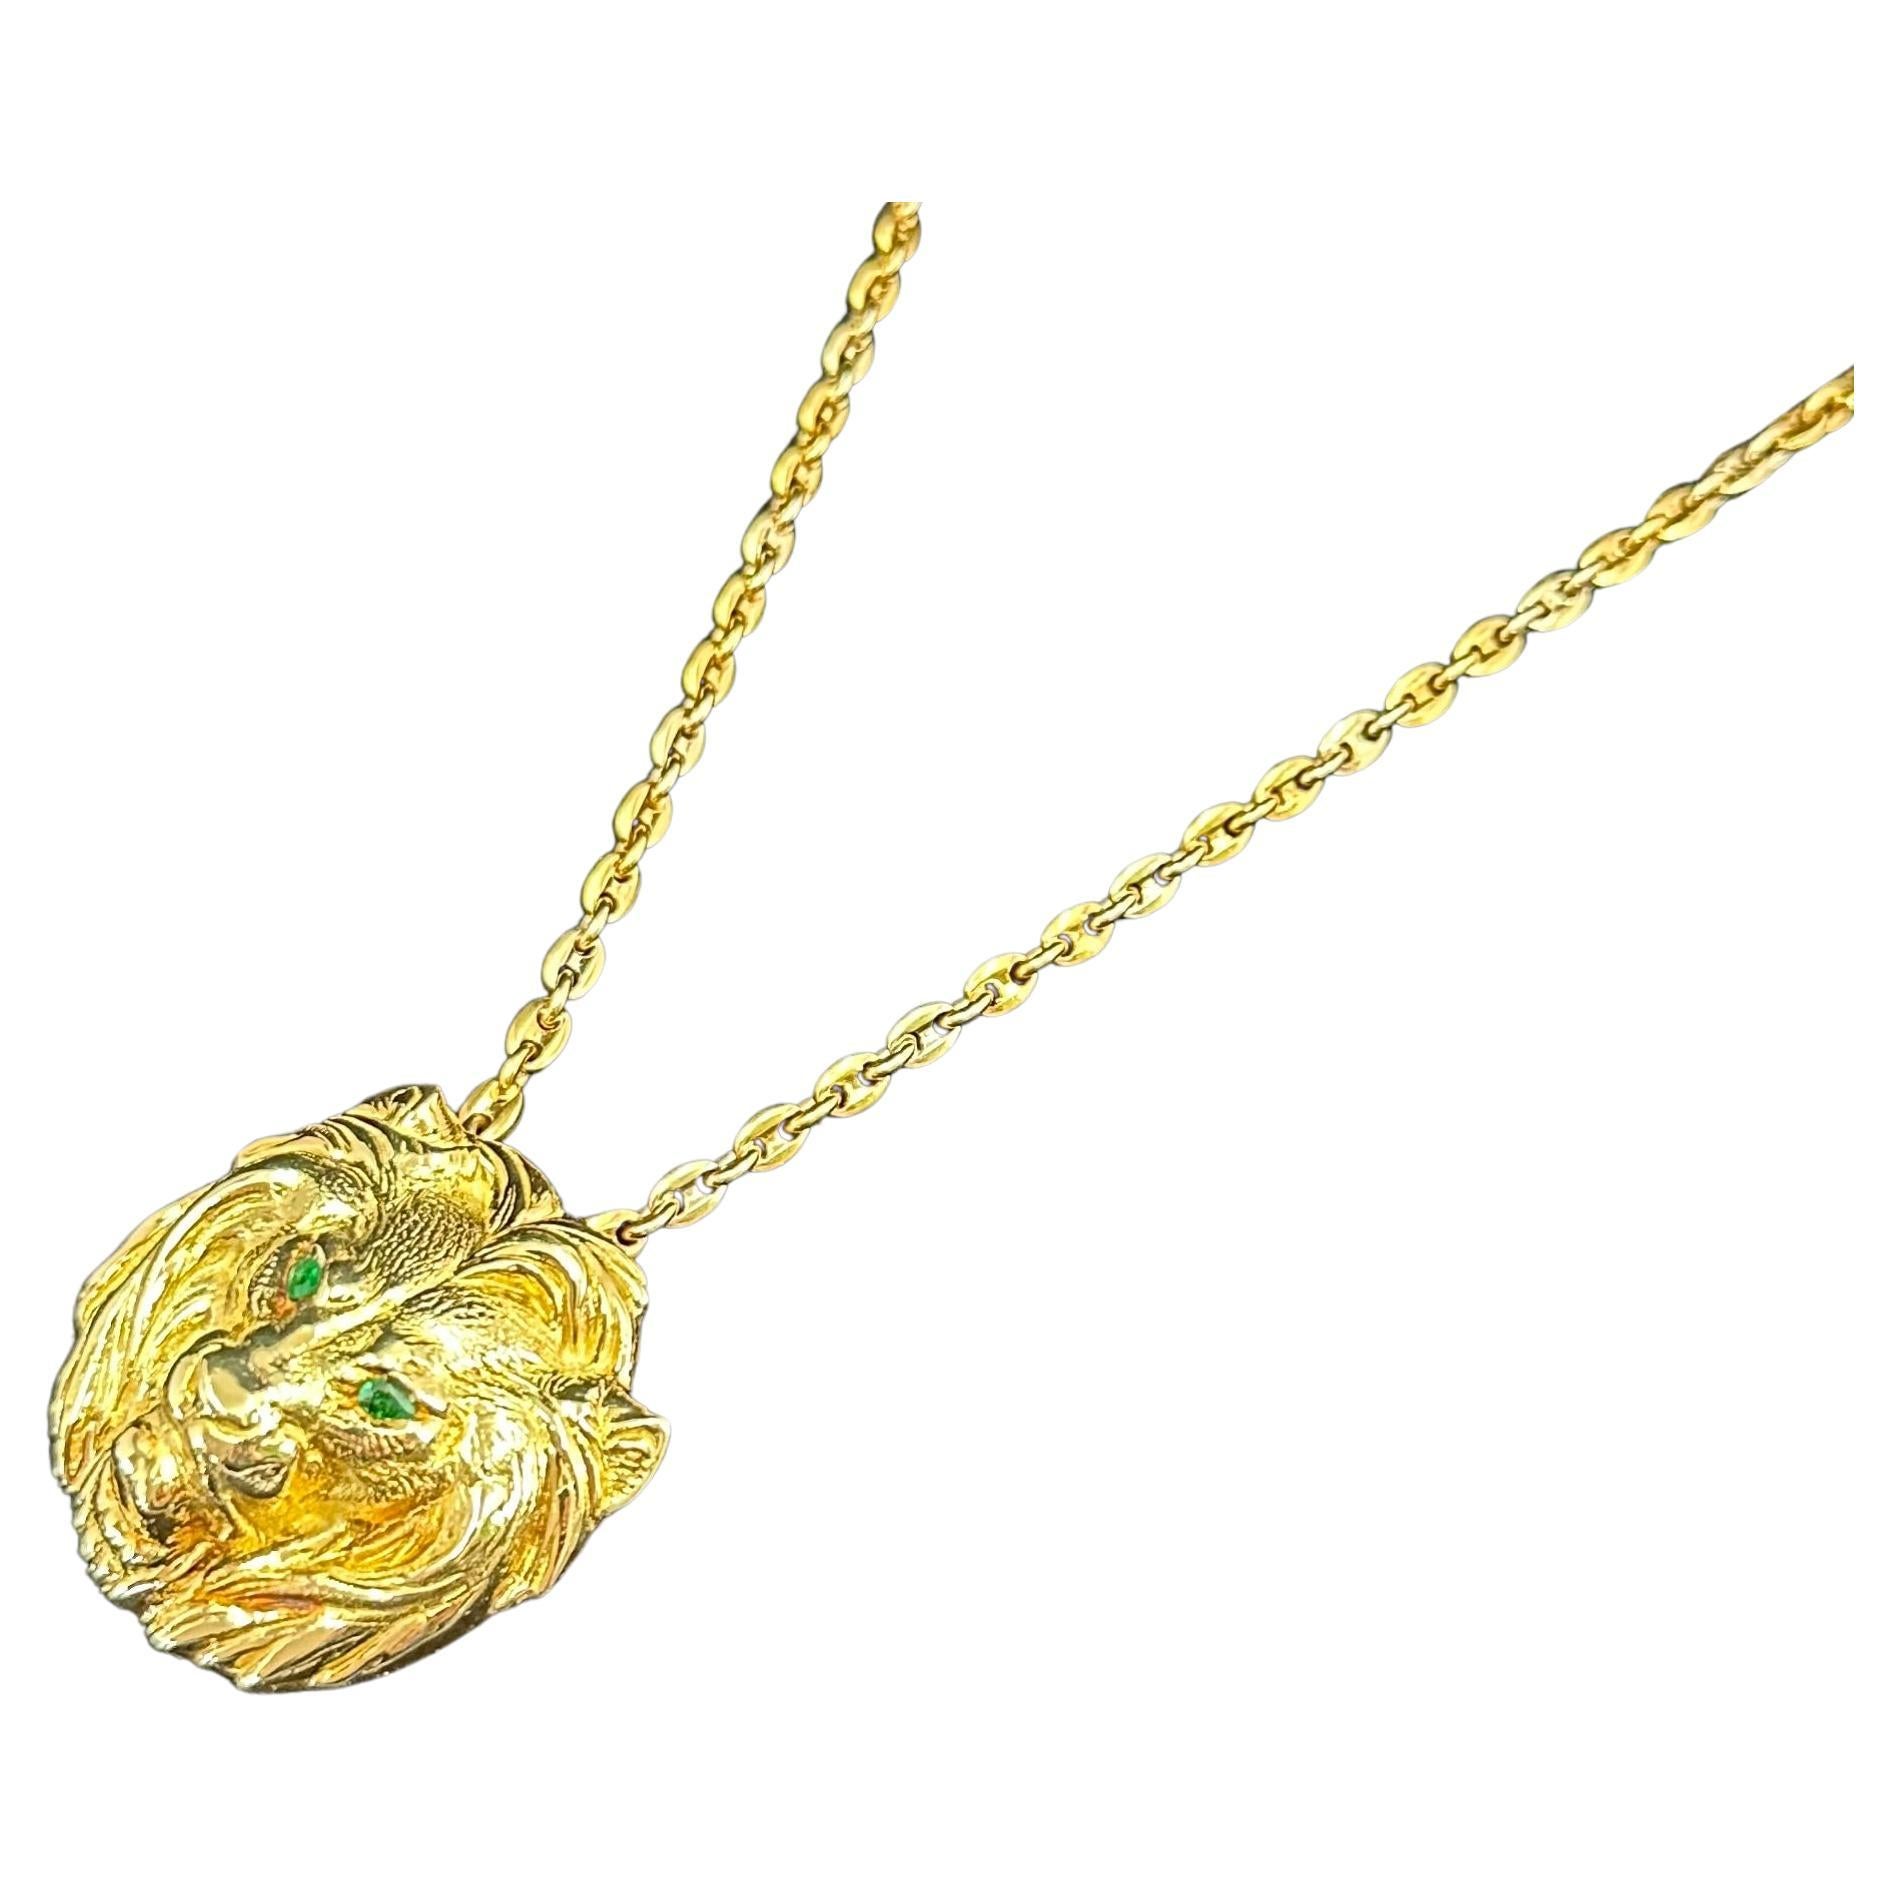 Cartier Paris, large Lion medallion with Green Emerald Eyes.
The Leo medallion is hallmarked Cartier and numbered
 18 karat Yellow Gold.
The chain is also signed Cartier and numbered.
The chain is 20.5 inches in length
The medallion is 2 inches x